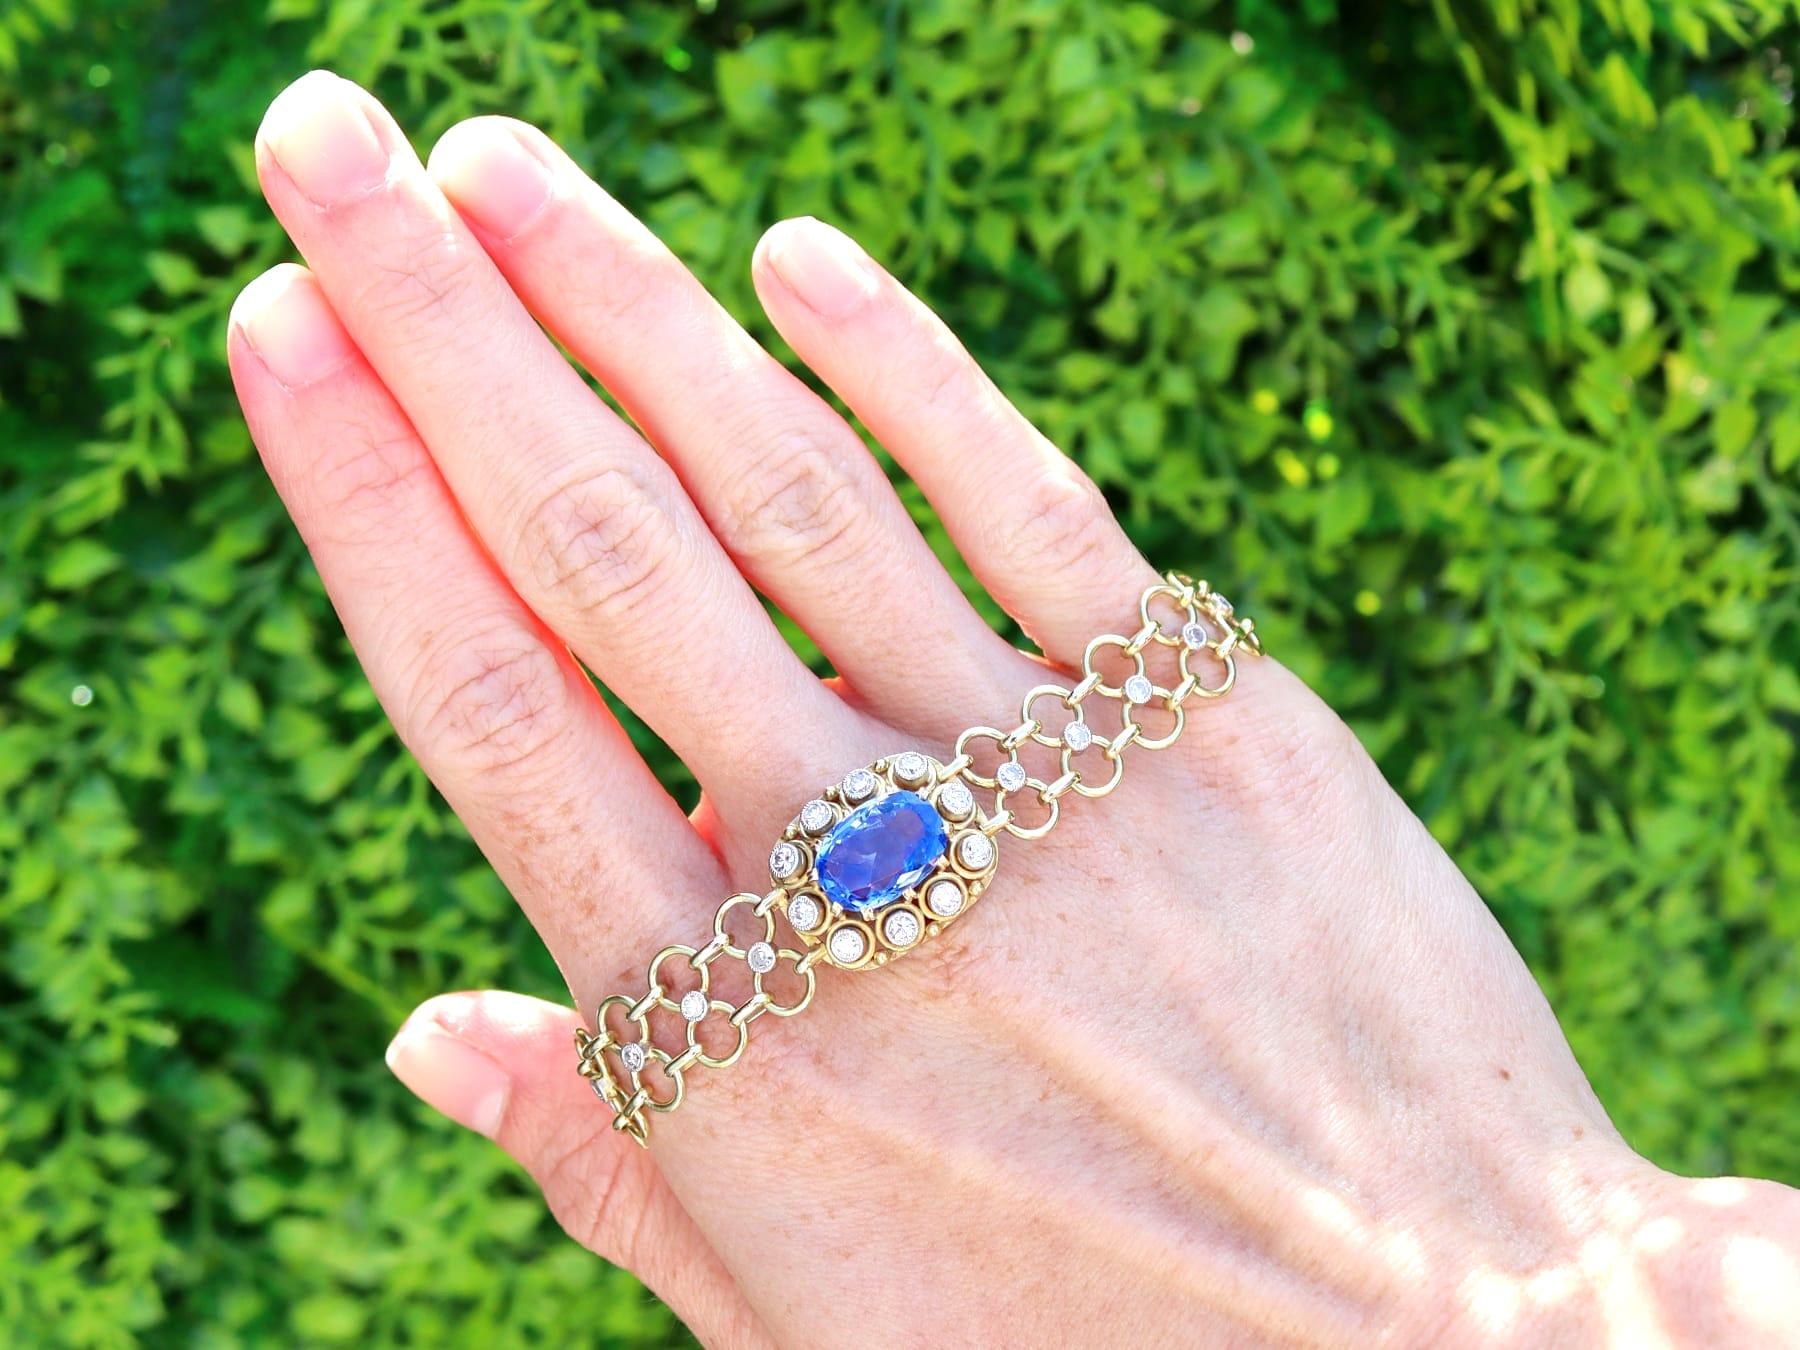 A stunning, fine and impressive 5.72 carat sapphire and 1.10 carat diamond, 12 karat yellow gold bracelet; part of our diverse vintage sapphire jewelry and estate jewelry collections

This stunning, fine and impressive vintage sapphire bracelet has